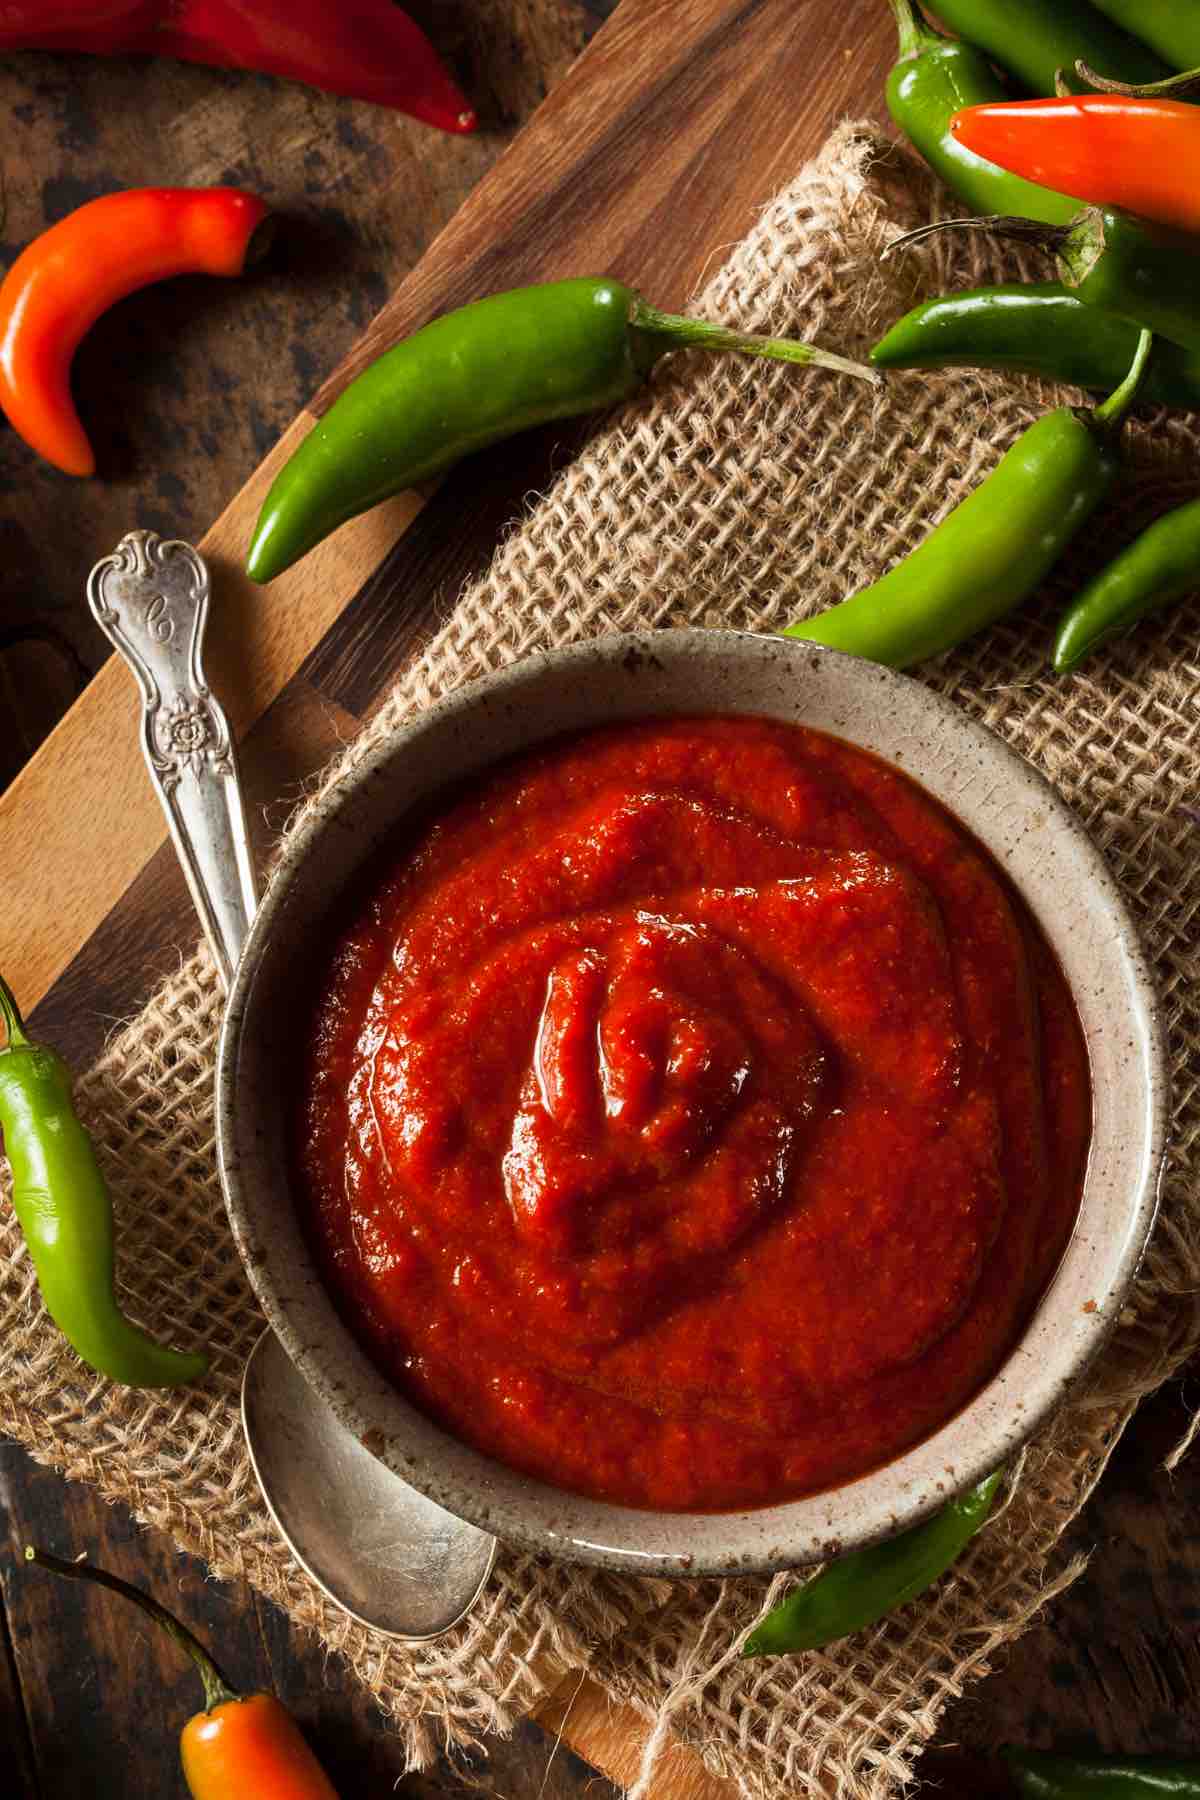 Think you can handle the HEAT? We’ve rounded up the top 5 Hottest Hot Sauces In The World! Whether you lost a bet or you genuinely love spicy food, a dollop of any one of these sauces will have you feeling the burn in no time.